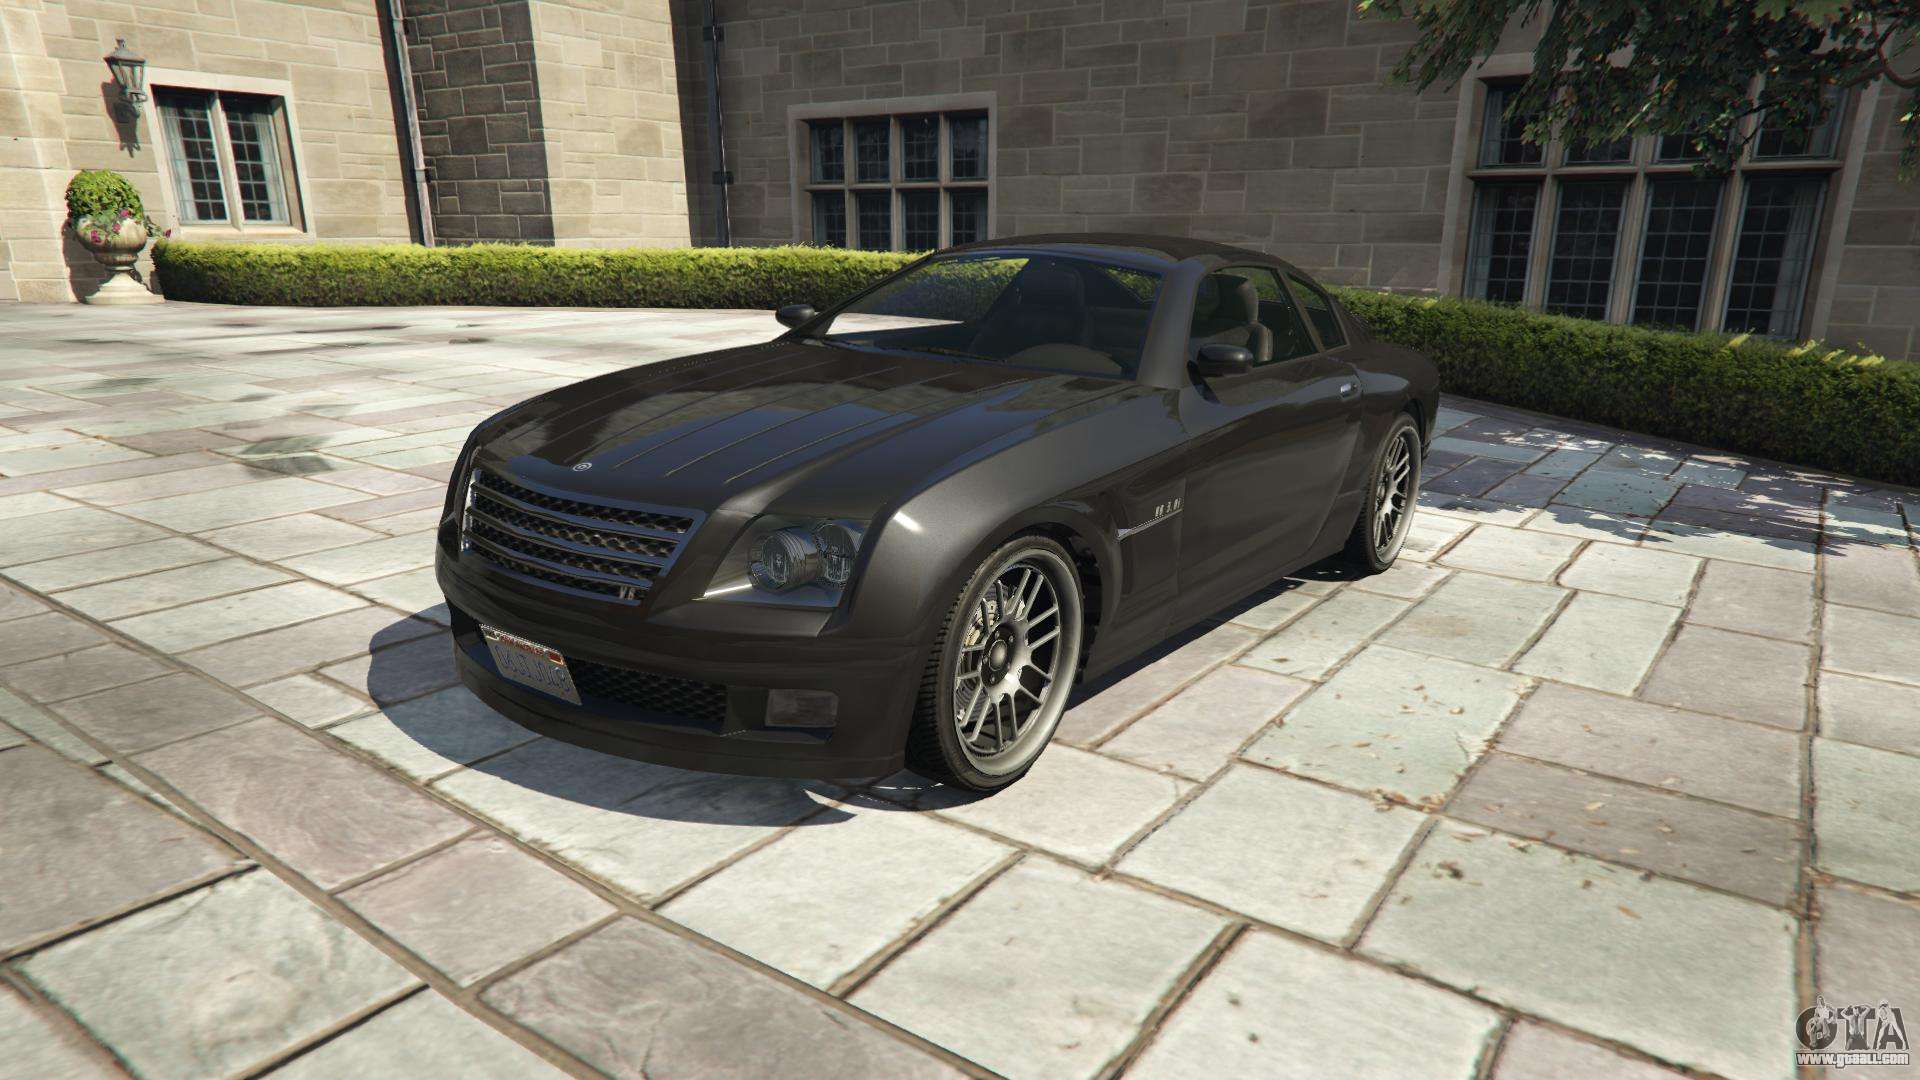 Shyster Fusilade of GTA 5 - front view